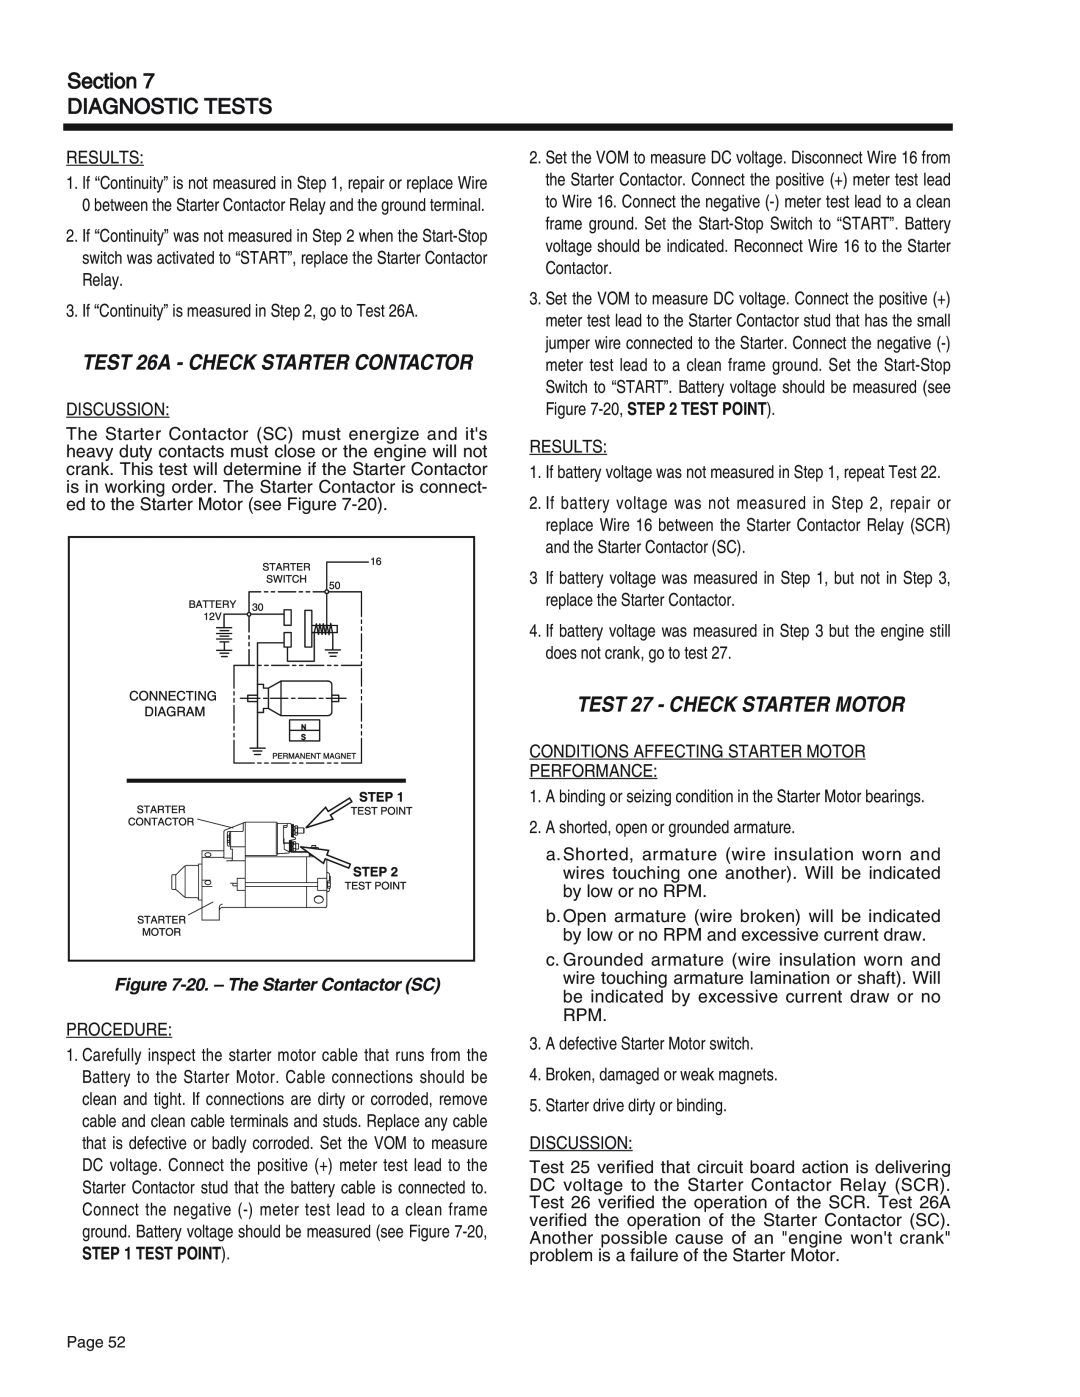 Generac Power Systems 55 TEST 26A - CHECK STARTER CONTACTOR, TEST 27 - CHECK STARTER MOTOR, 20.– The Starter Contactor SC 